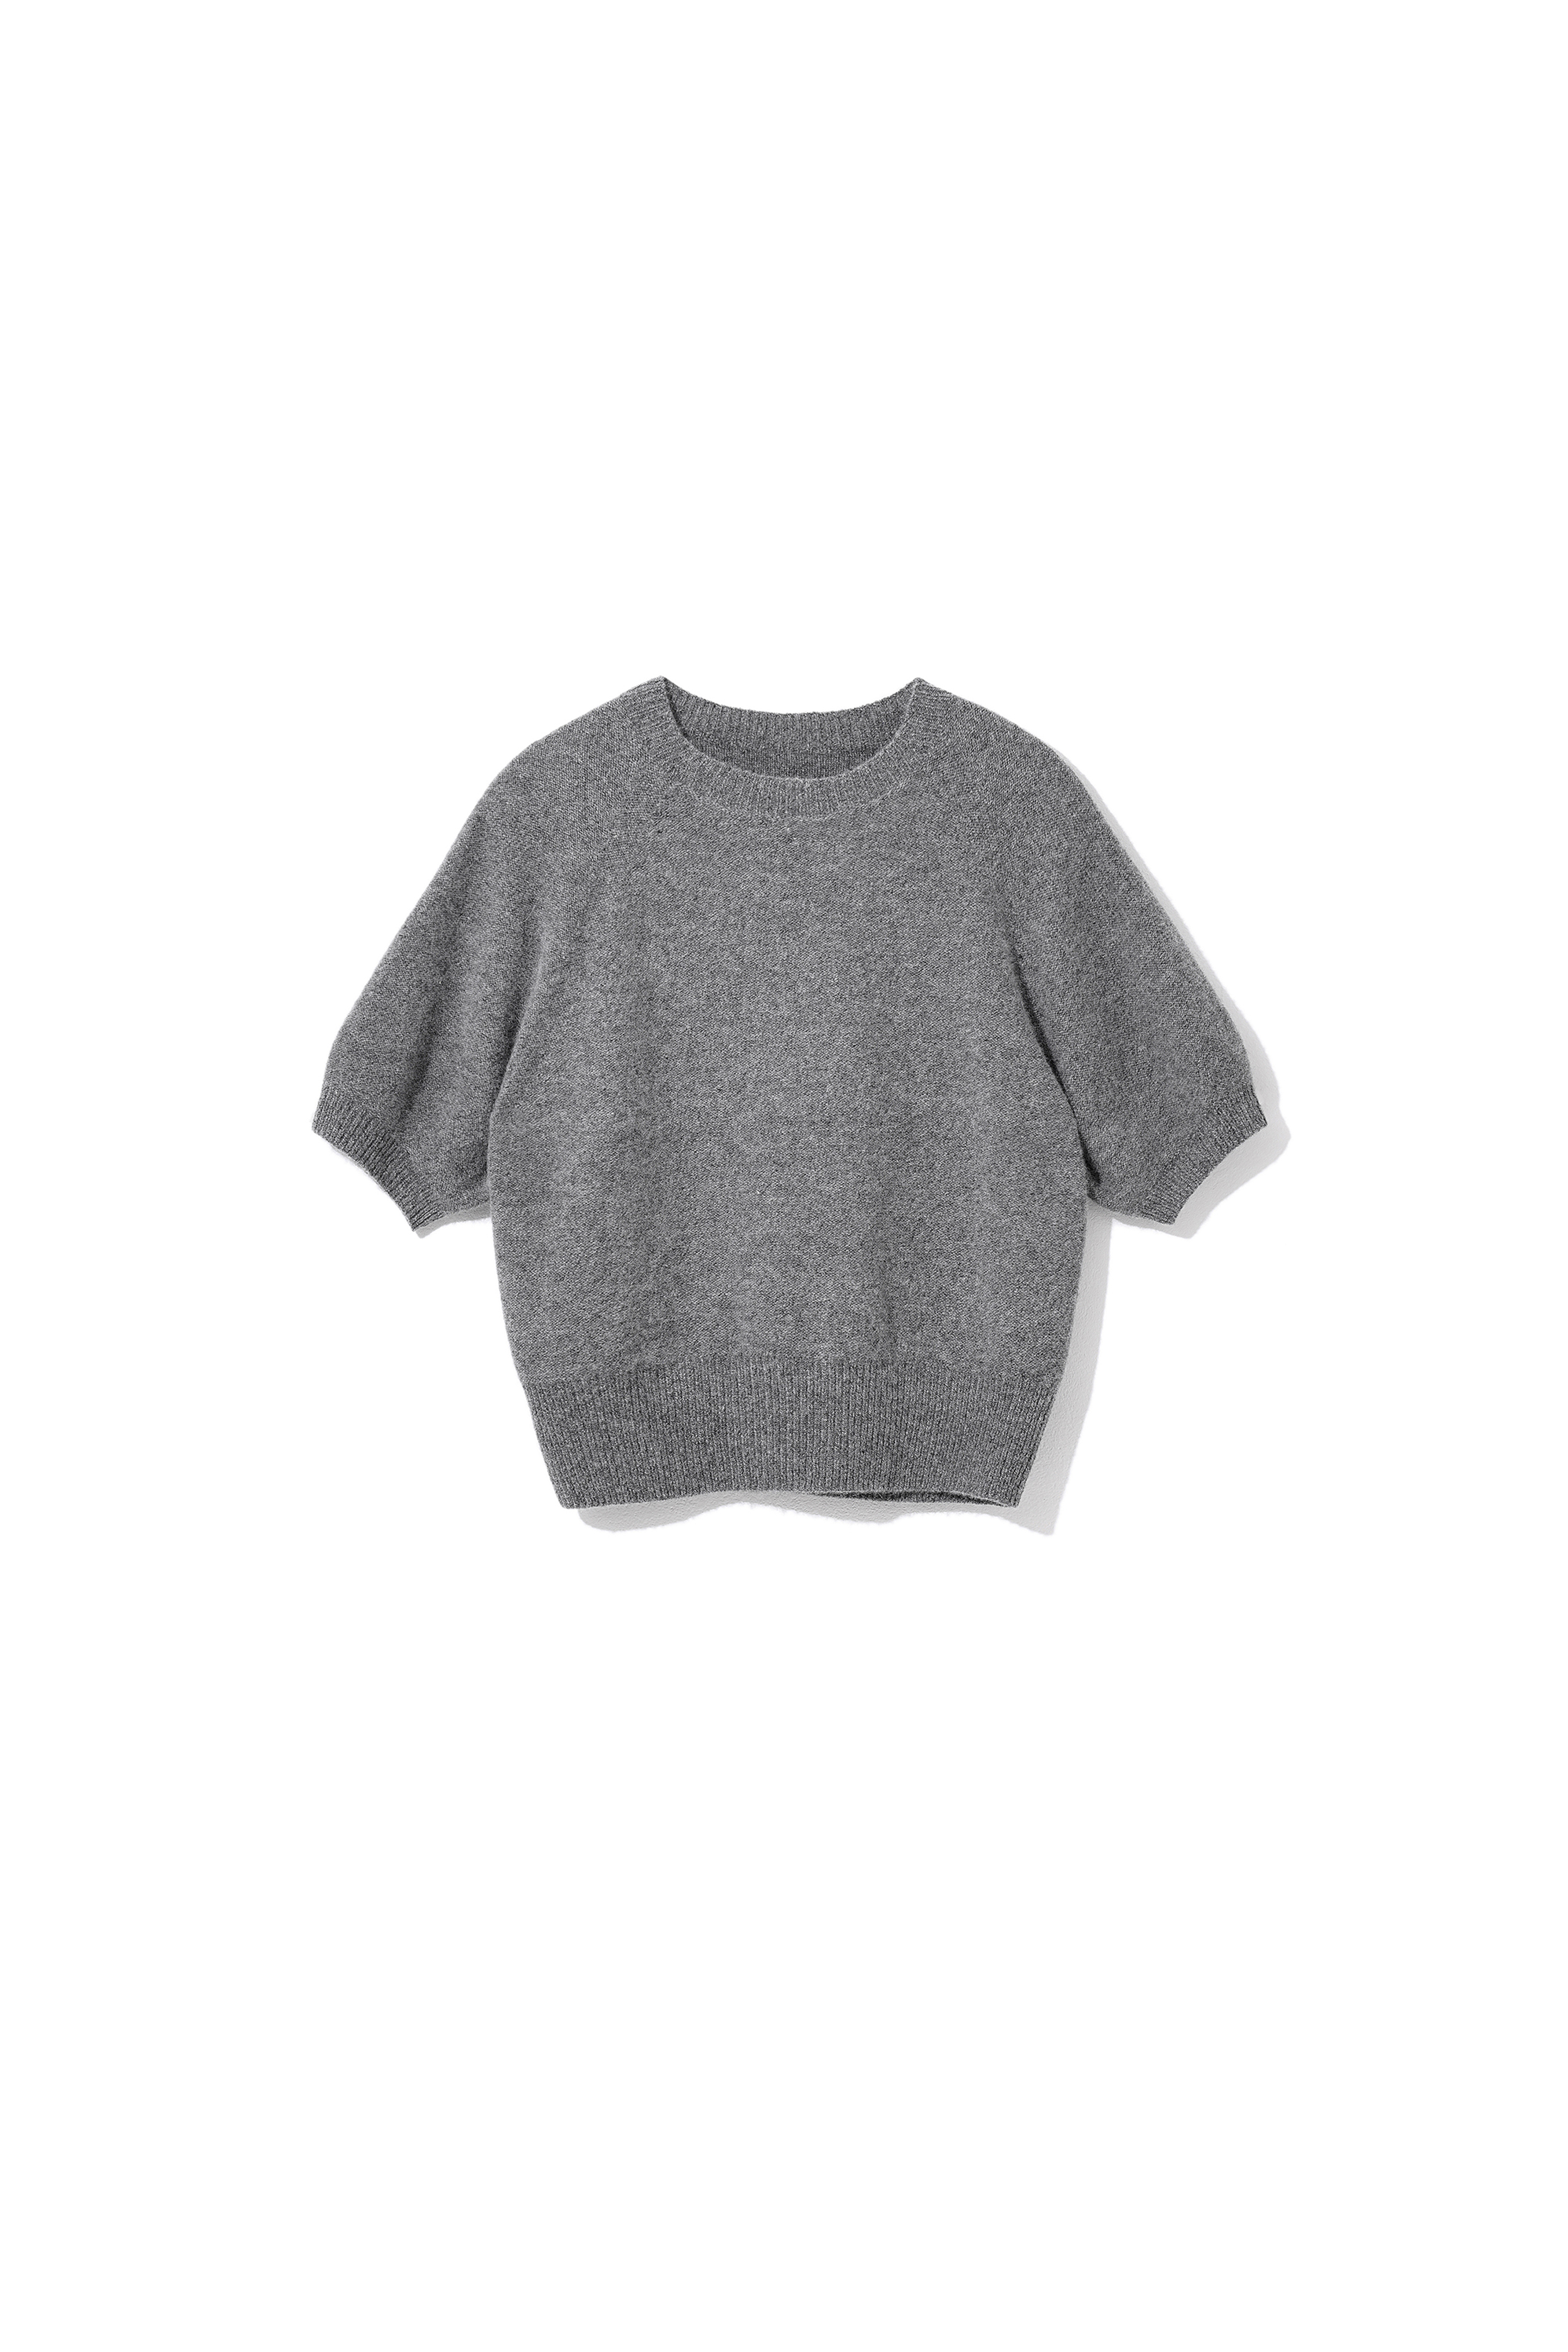 Mong Puff Sleeve Knitted P/O Grey [25% OFF, 09.18(MON) - 09.22(FRI)]